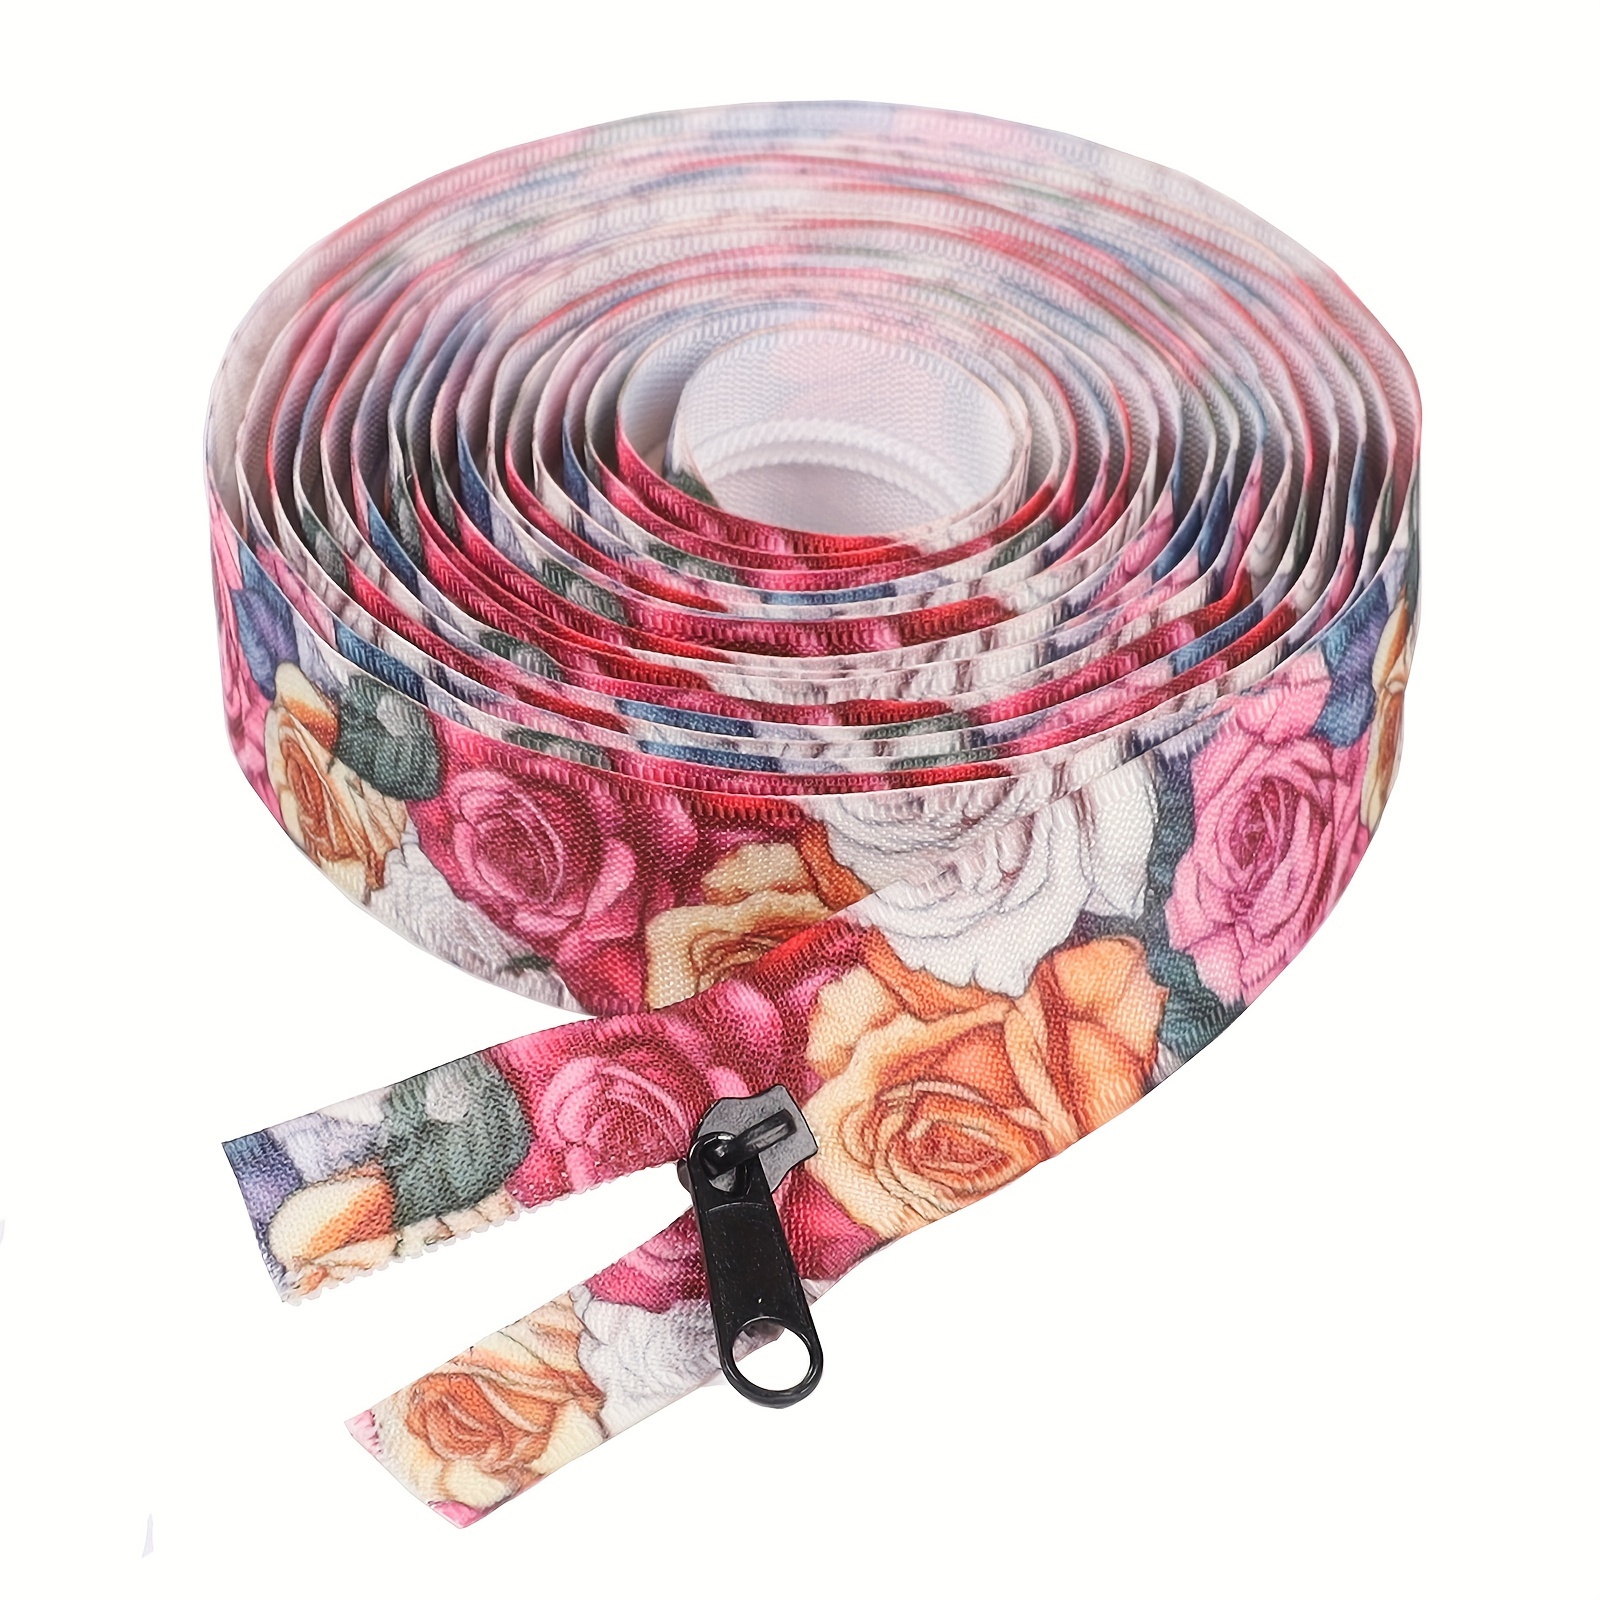 

1pc Peony 4.5 Meter Zipper With 10 Lock-free Zipper Pullers, No. 5 Transfer Floral Nylon Zipper Suitable For Luggage Home Textiles Clothing